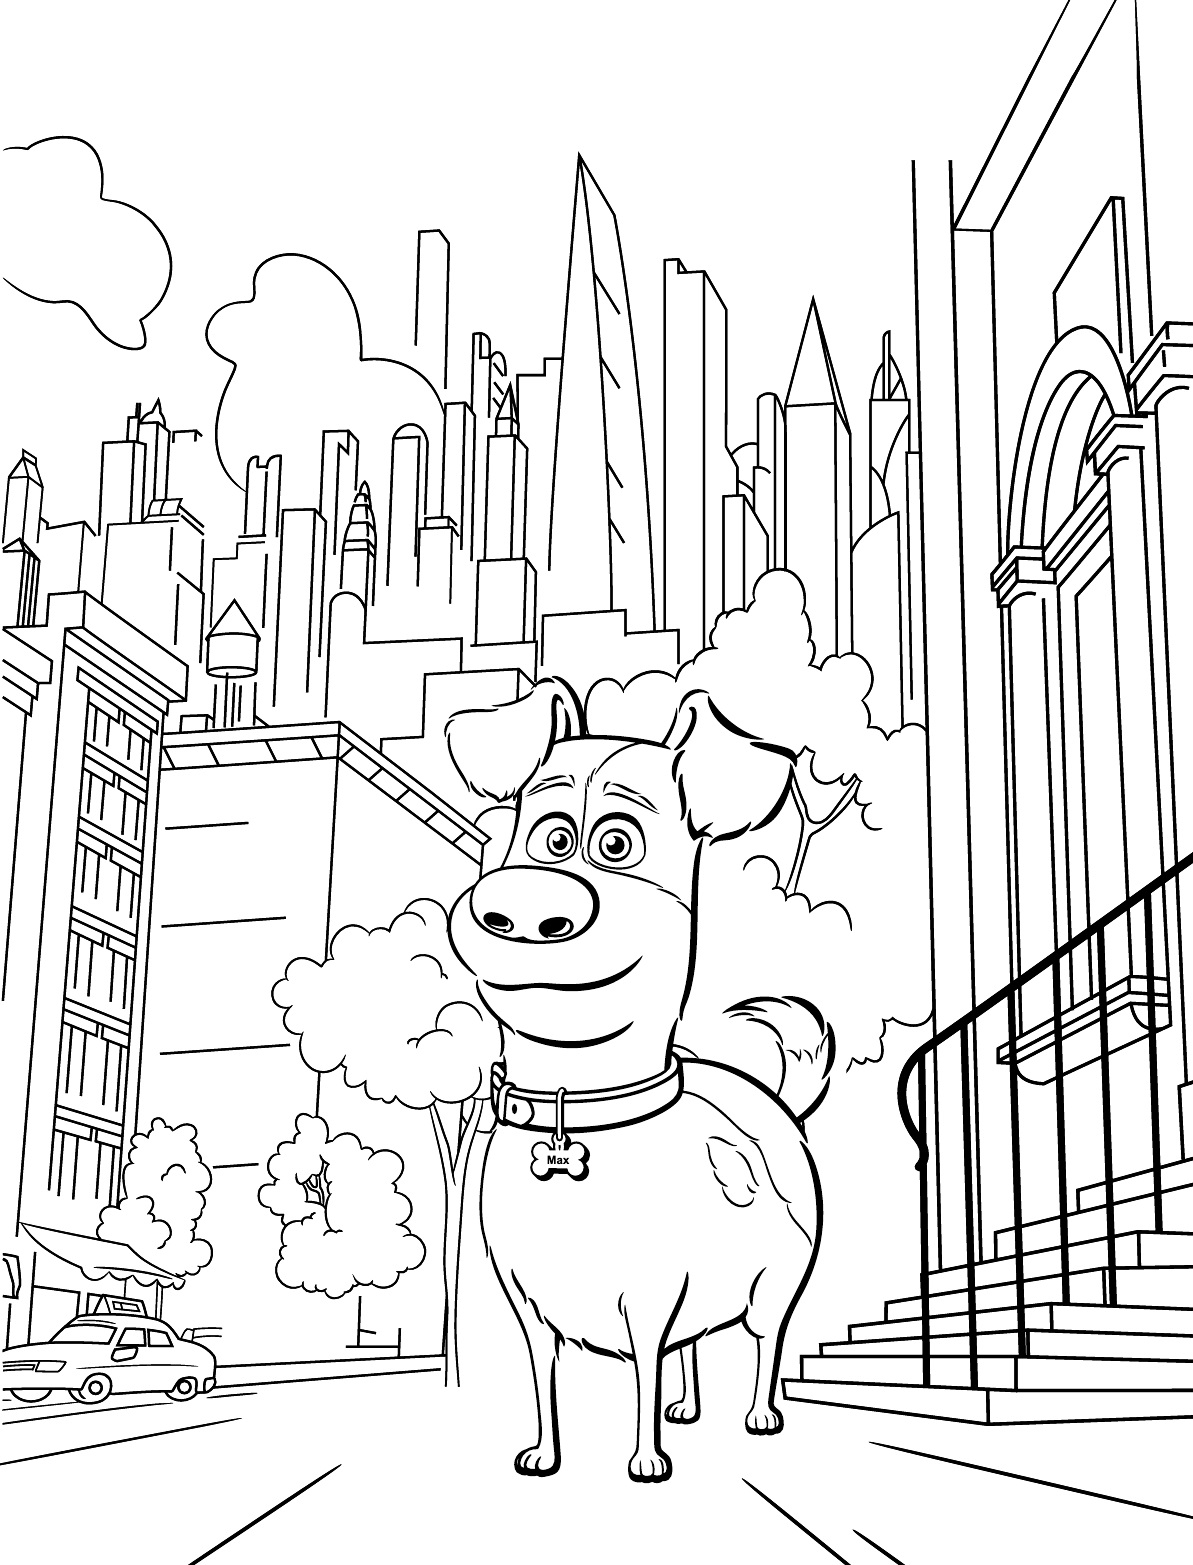 The Secret Life of Pets Coloring Pages. Print Them for Free!